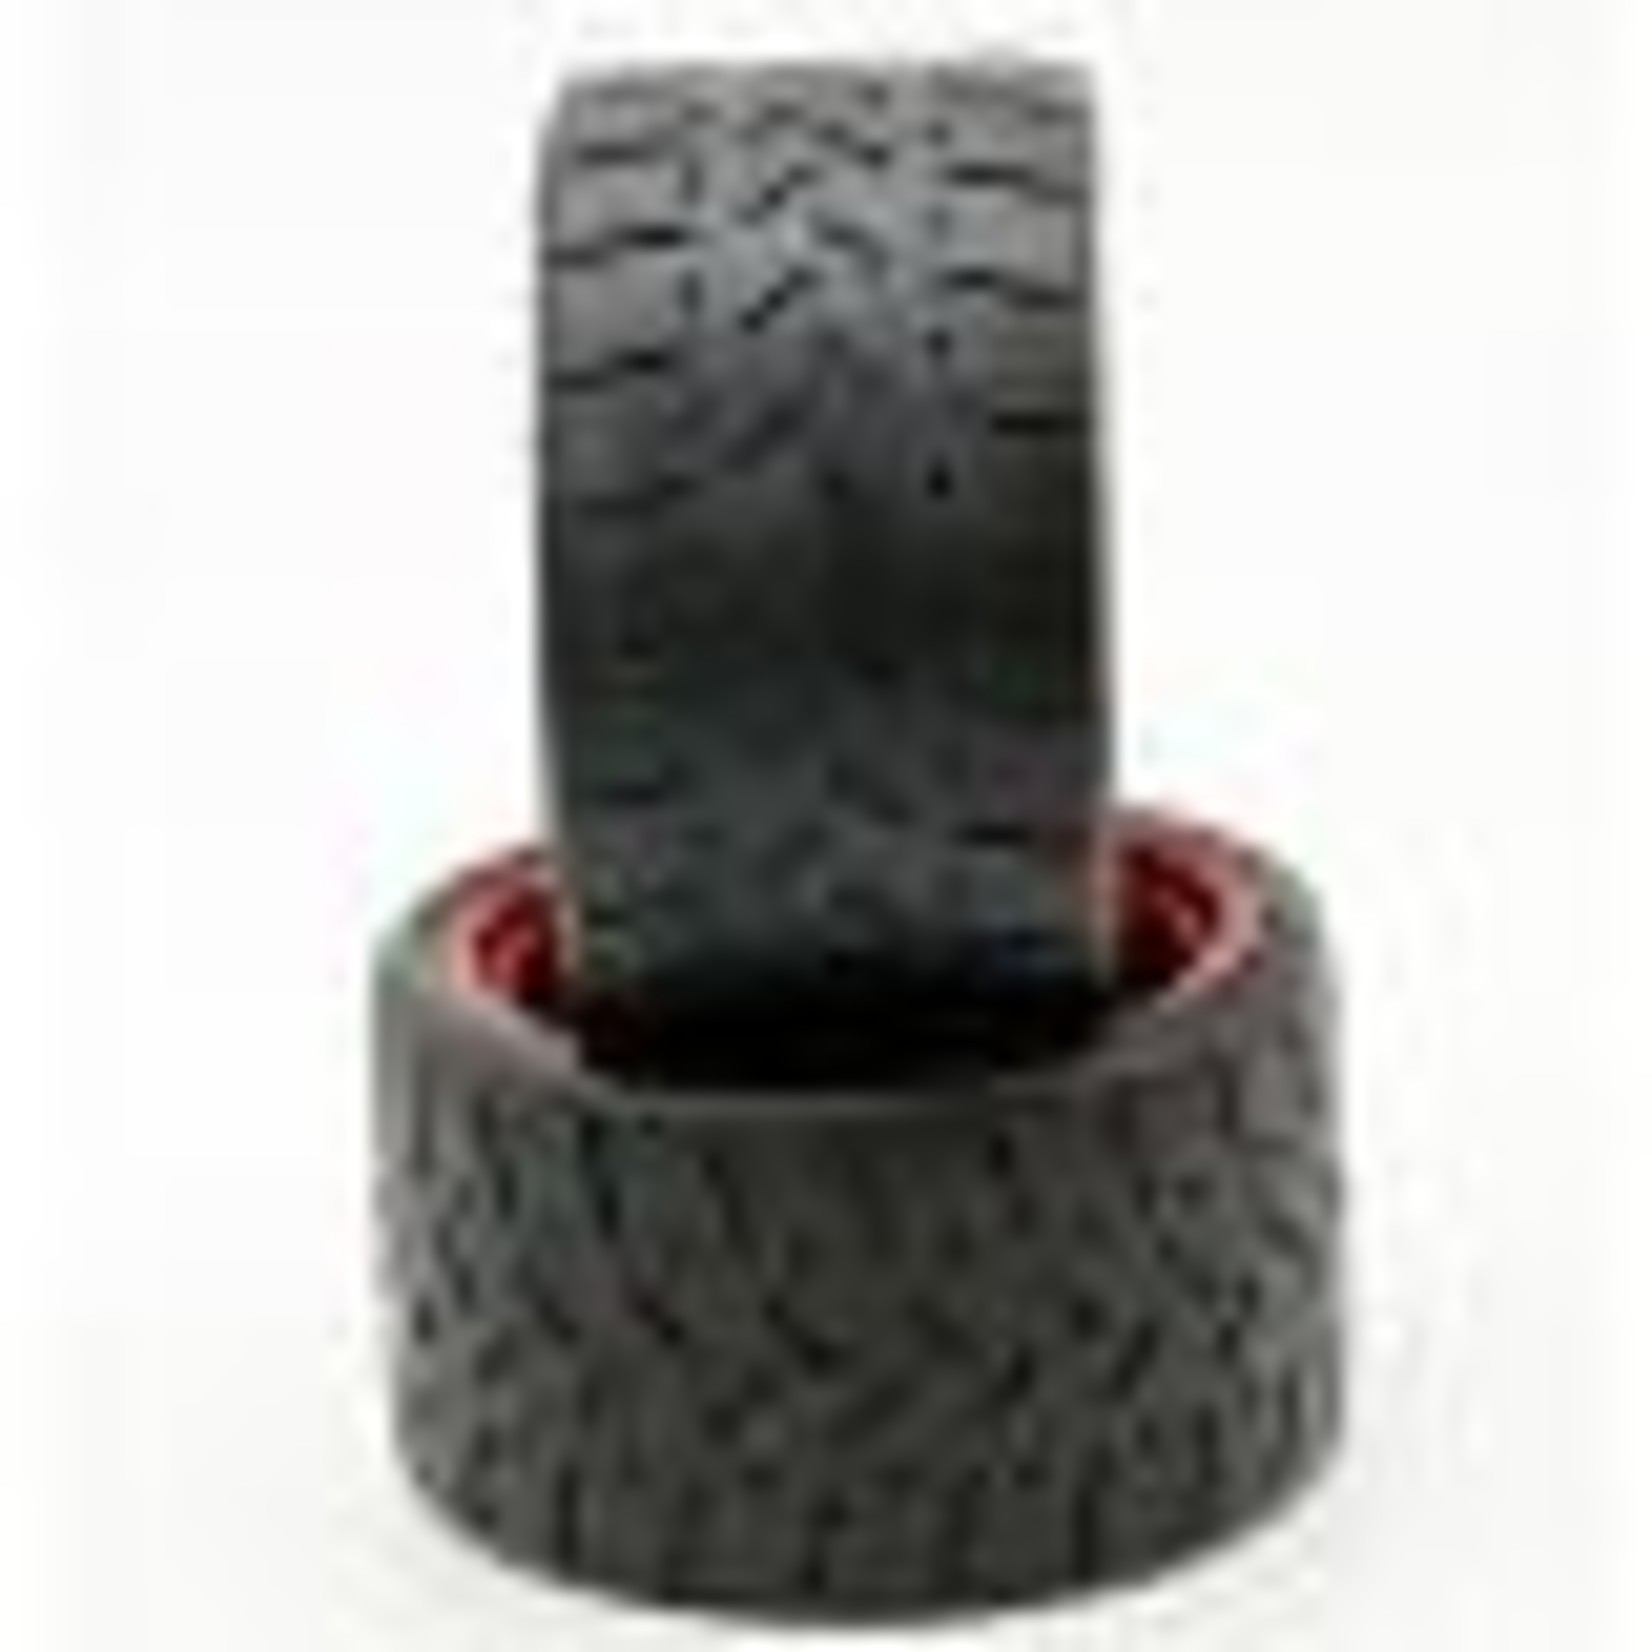 Powerhobby PHT5102-Red  Powerhobby 1/8 Gripper 54/100 Belted Mounted Tires 17mm Red Wheels